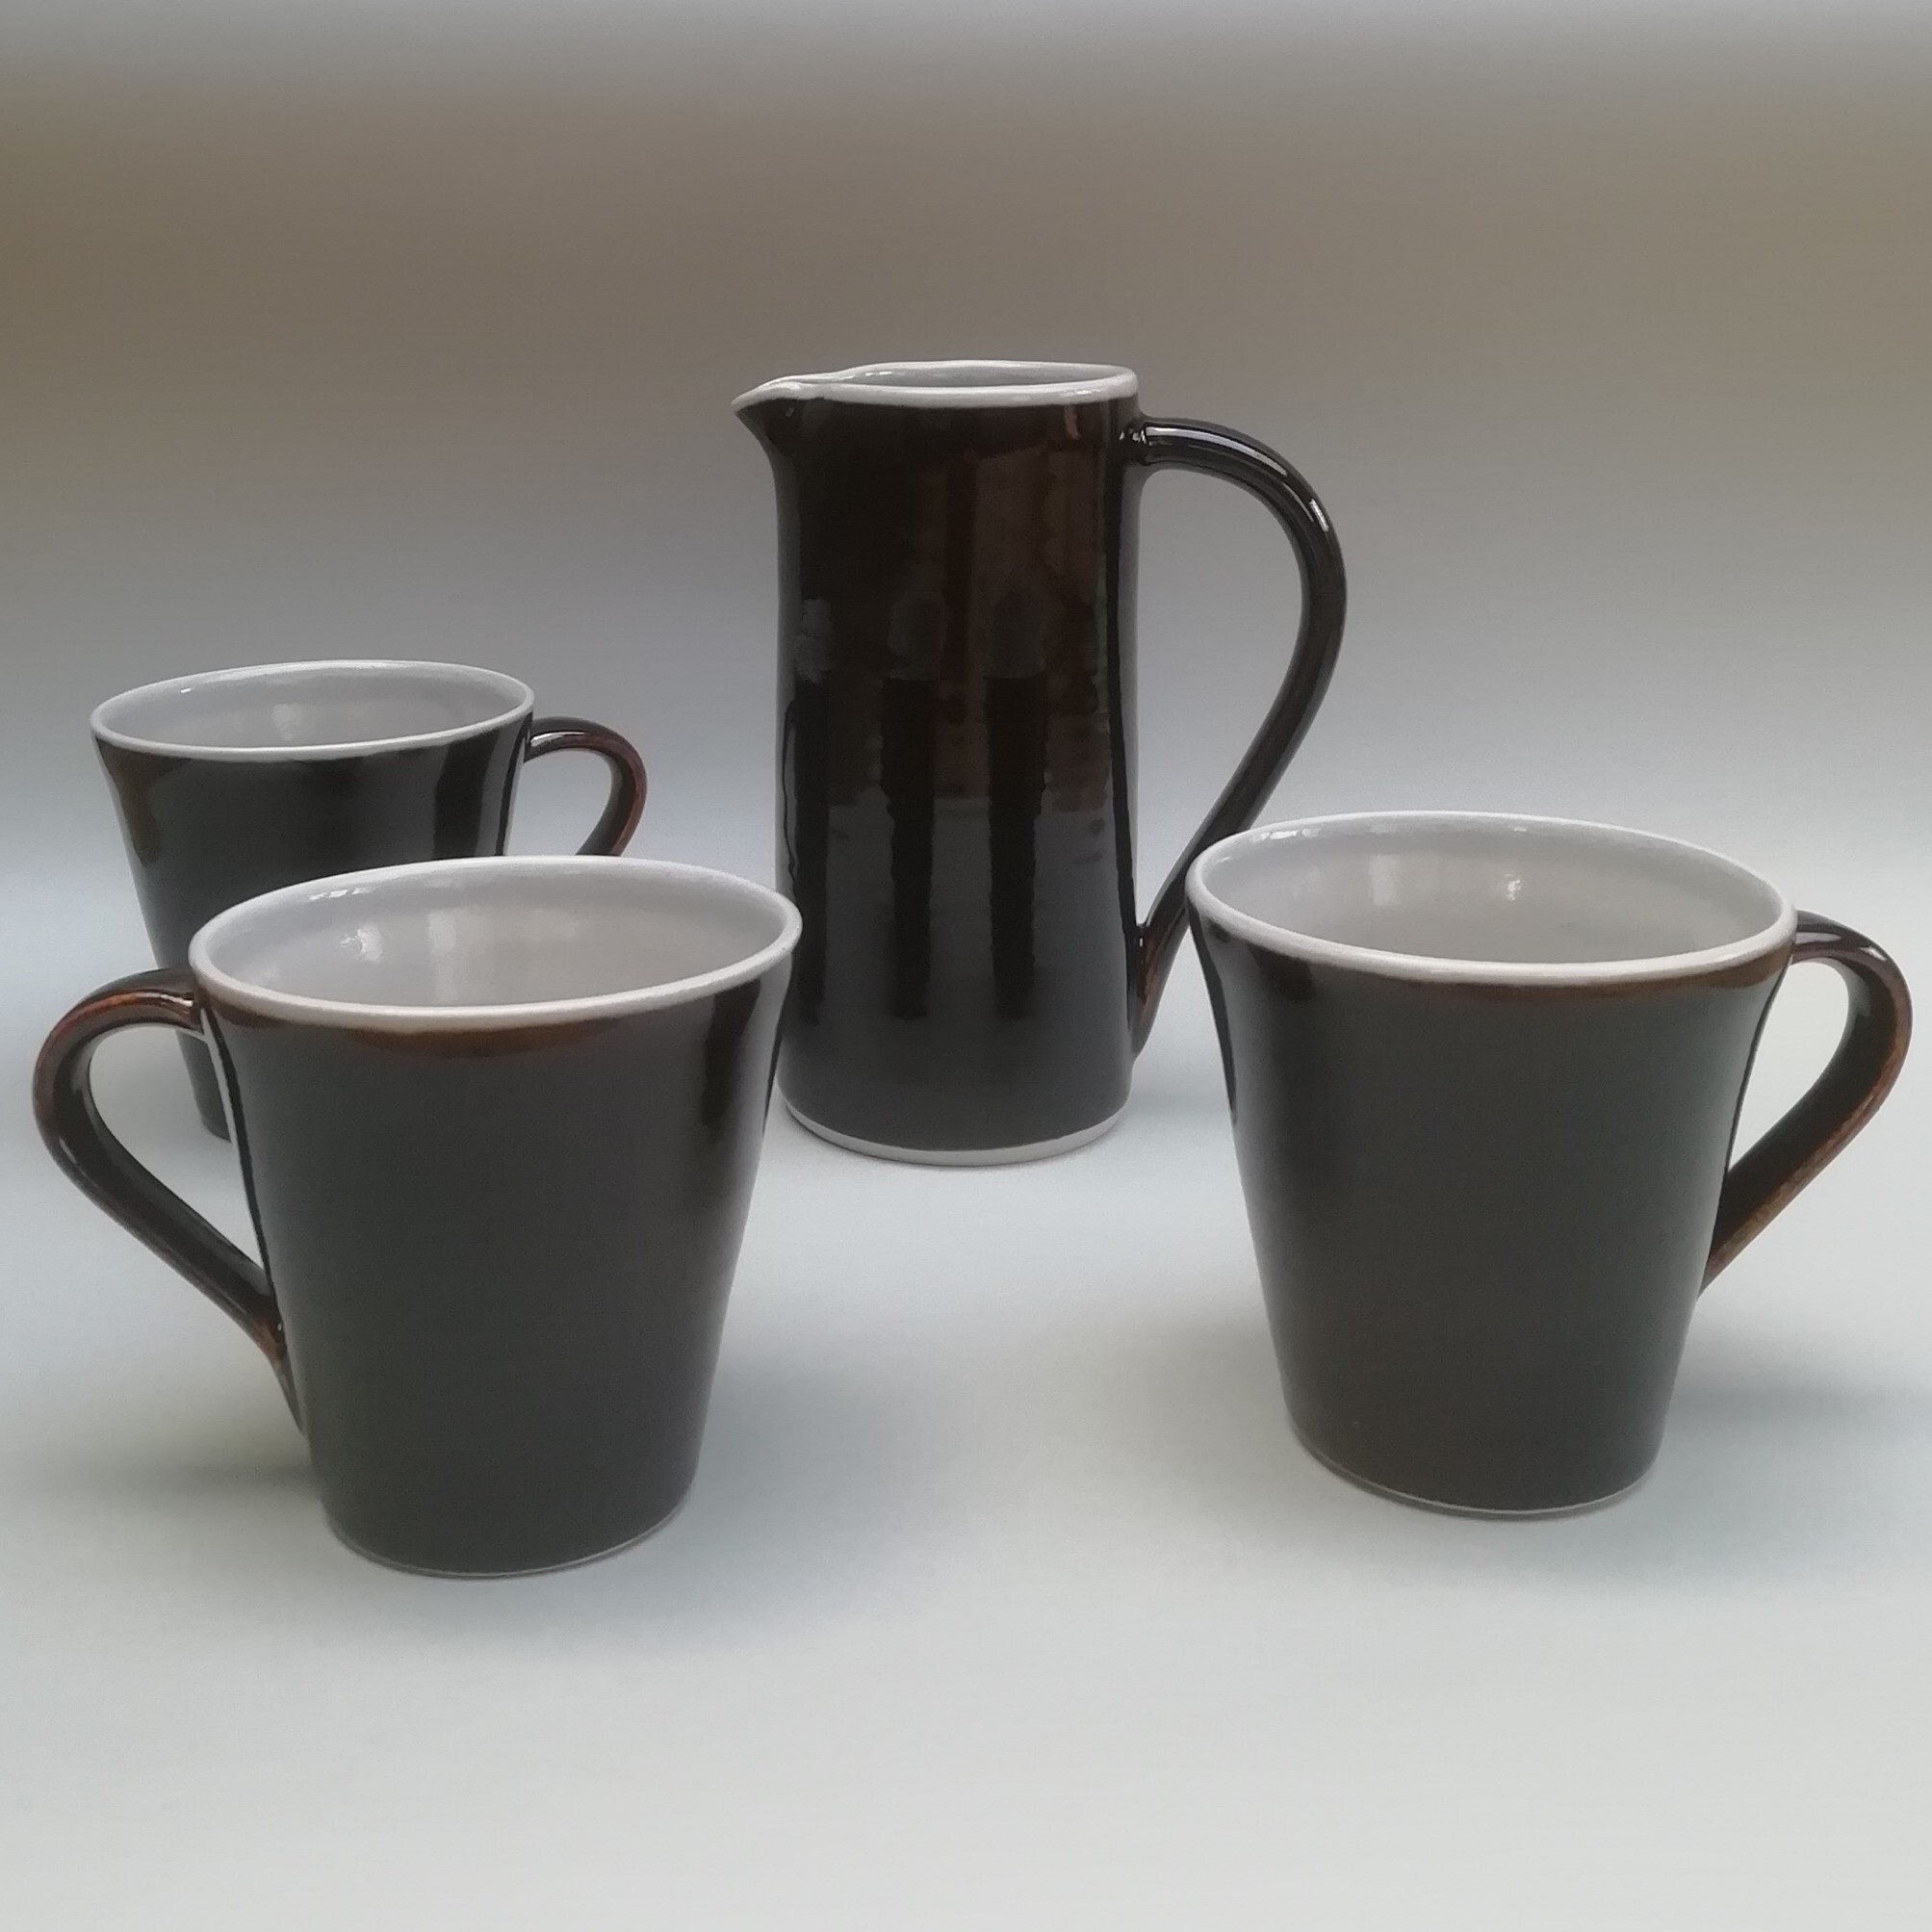 Brown and grey jug and cups square big.jpg